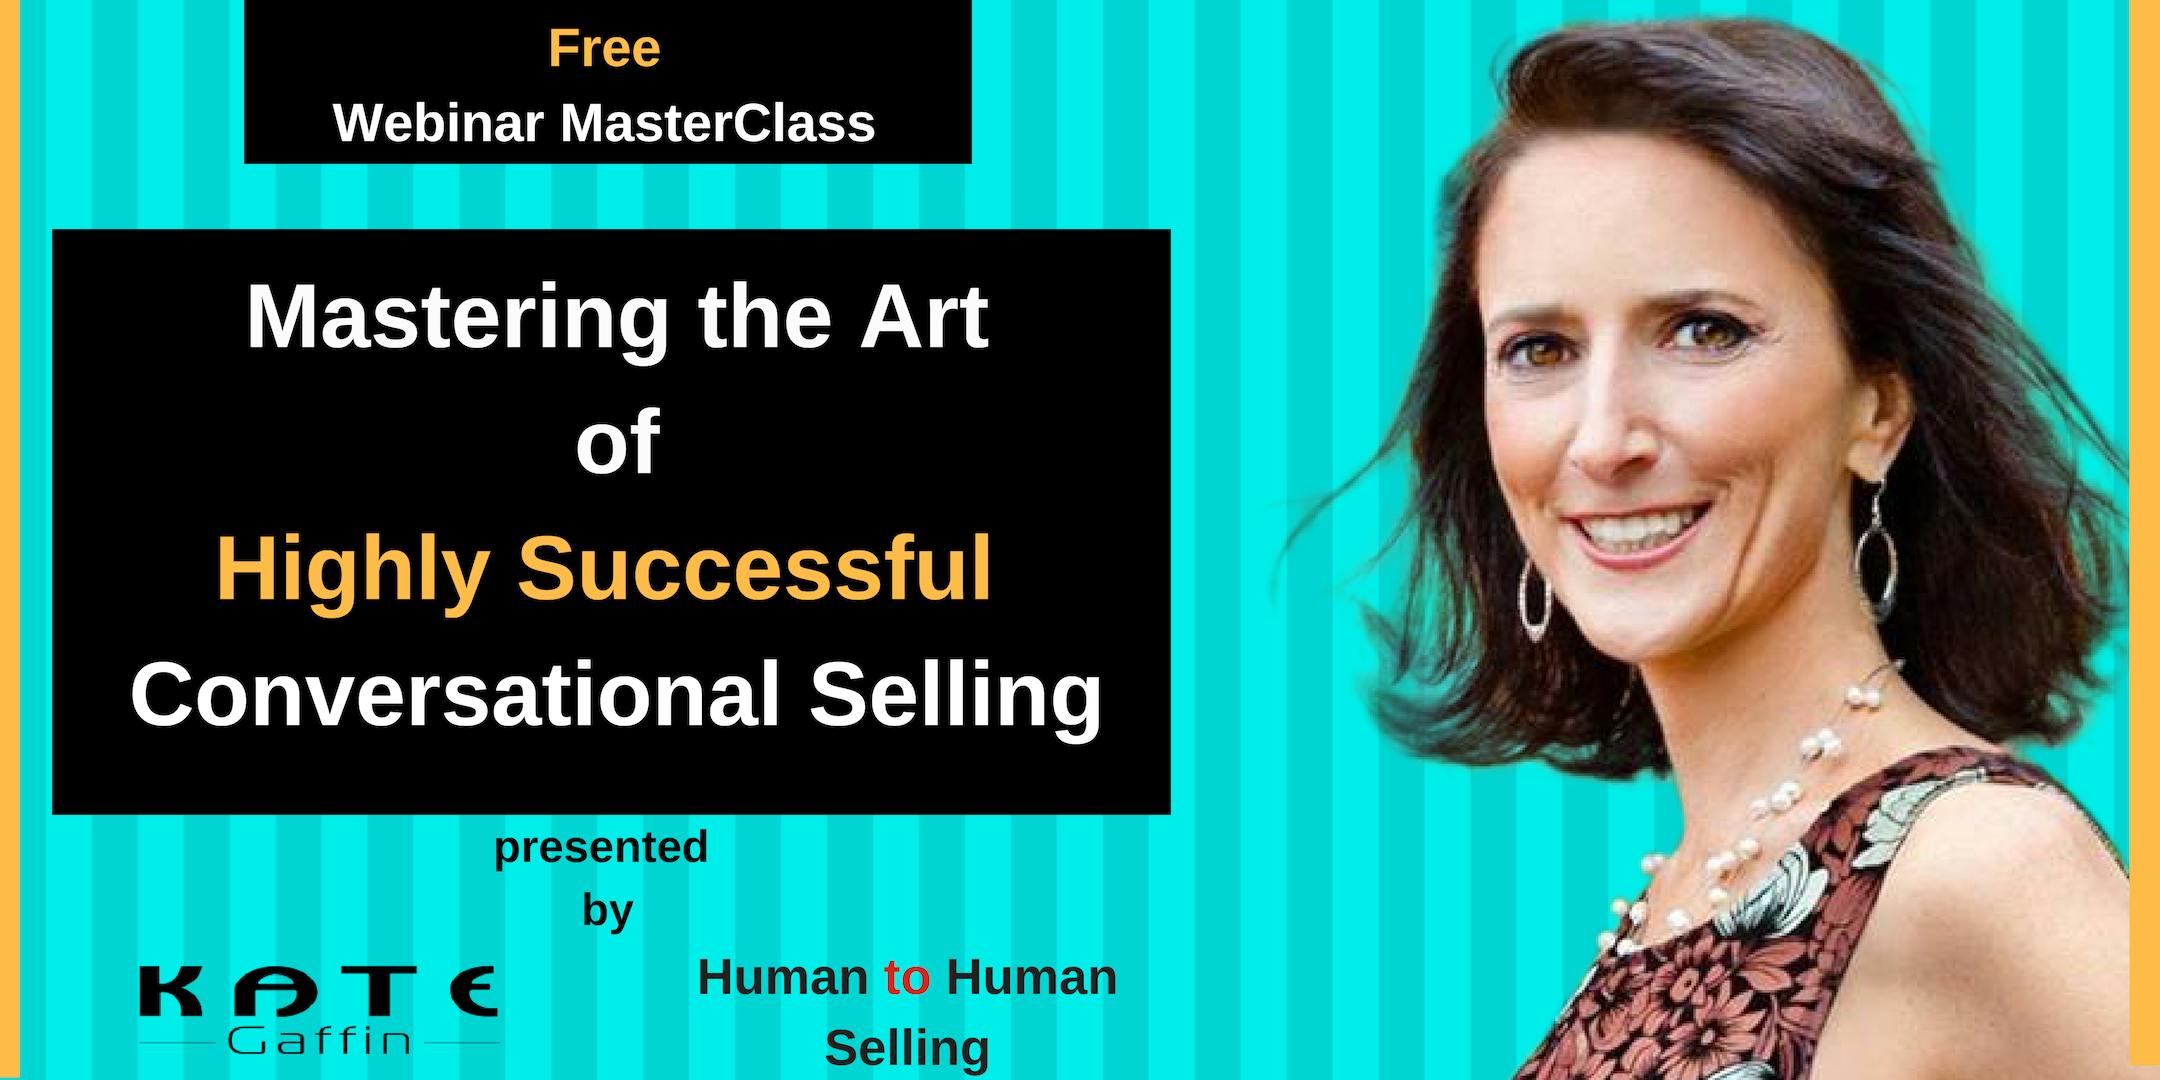 Mastering the Art of Highly Successful Conversational Selling - Free Webinar MasterClass (Business and Networking)